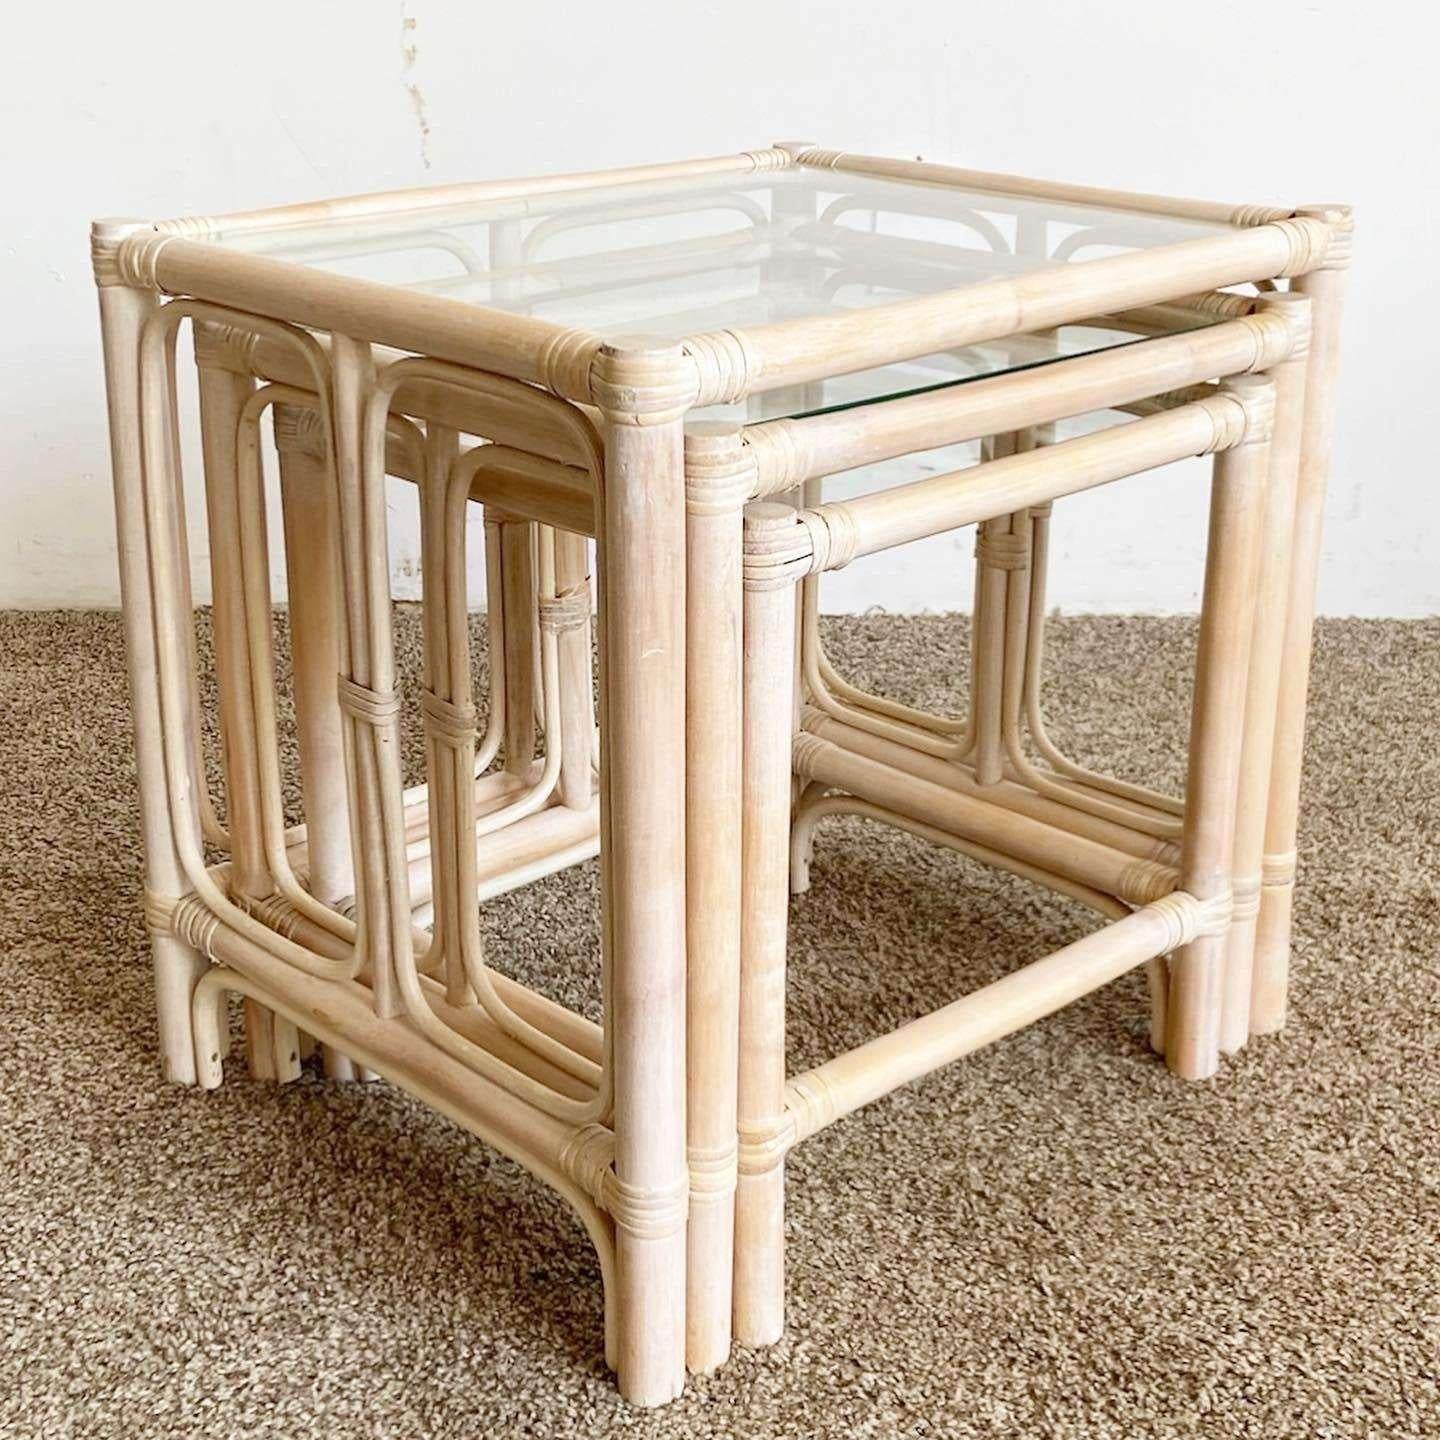 Late 20th Century Boho Chic Bamboo Rattan Nesting Tables - Set of 3 For Sale